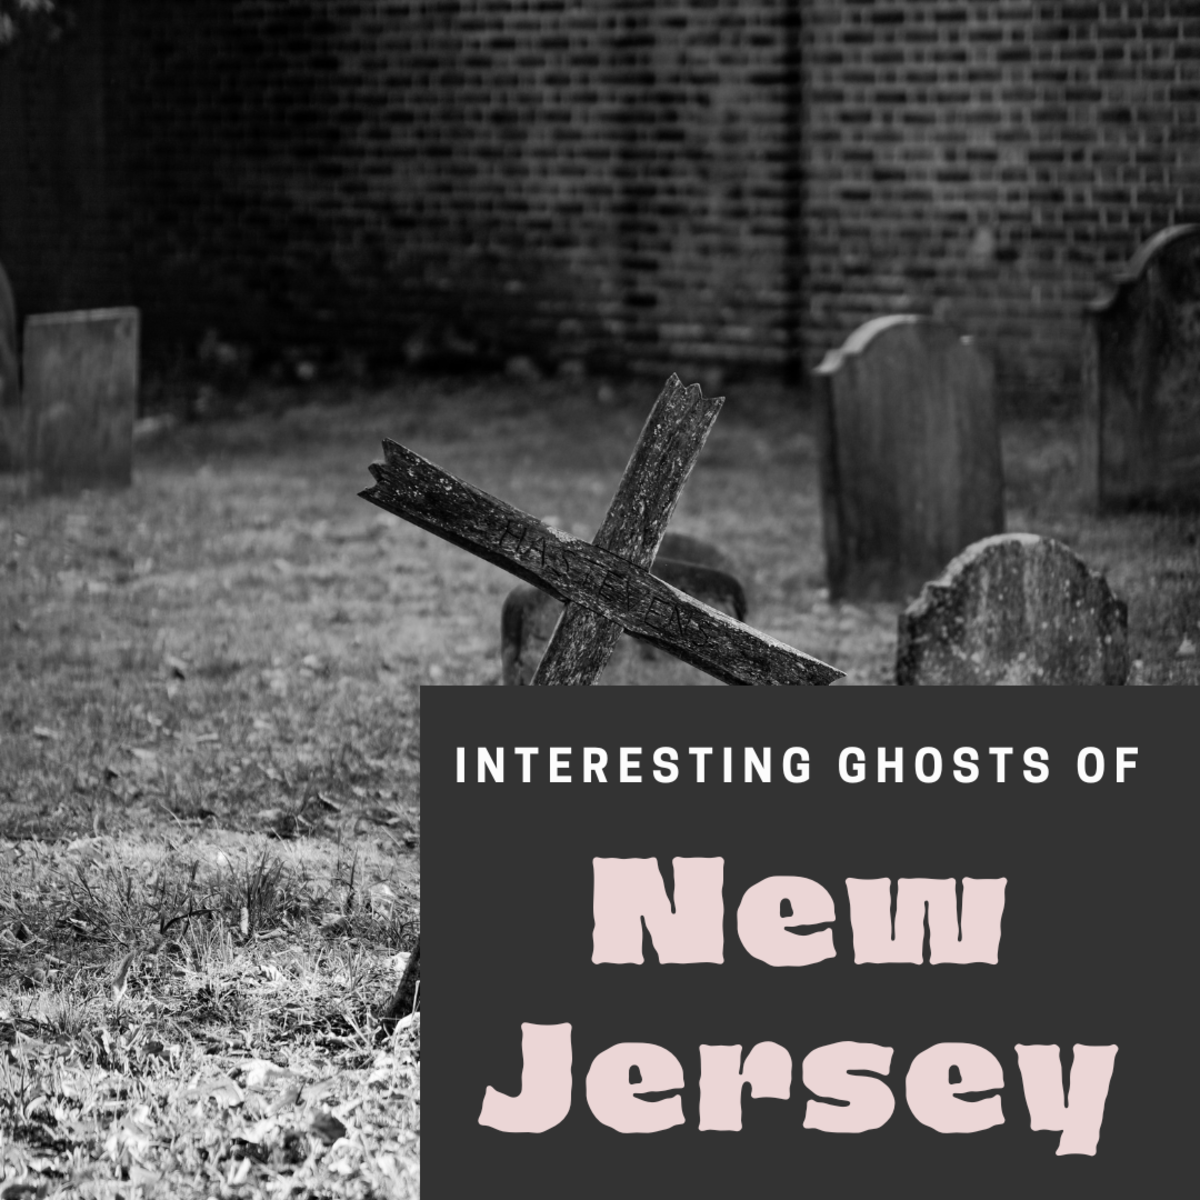 New Jersey is home to some fascinating haunted places.